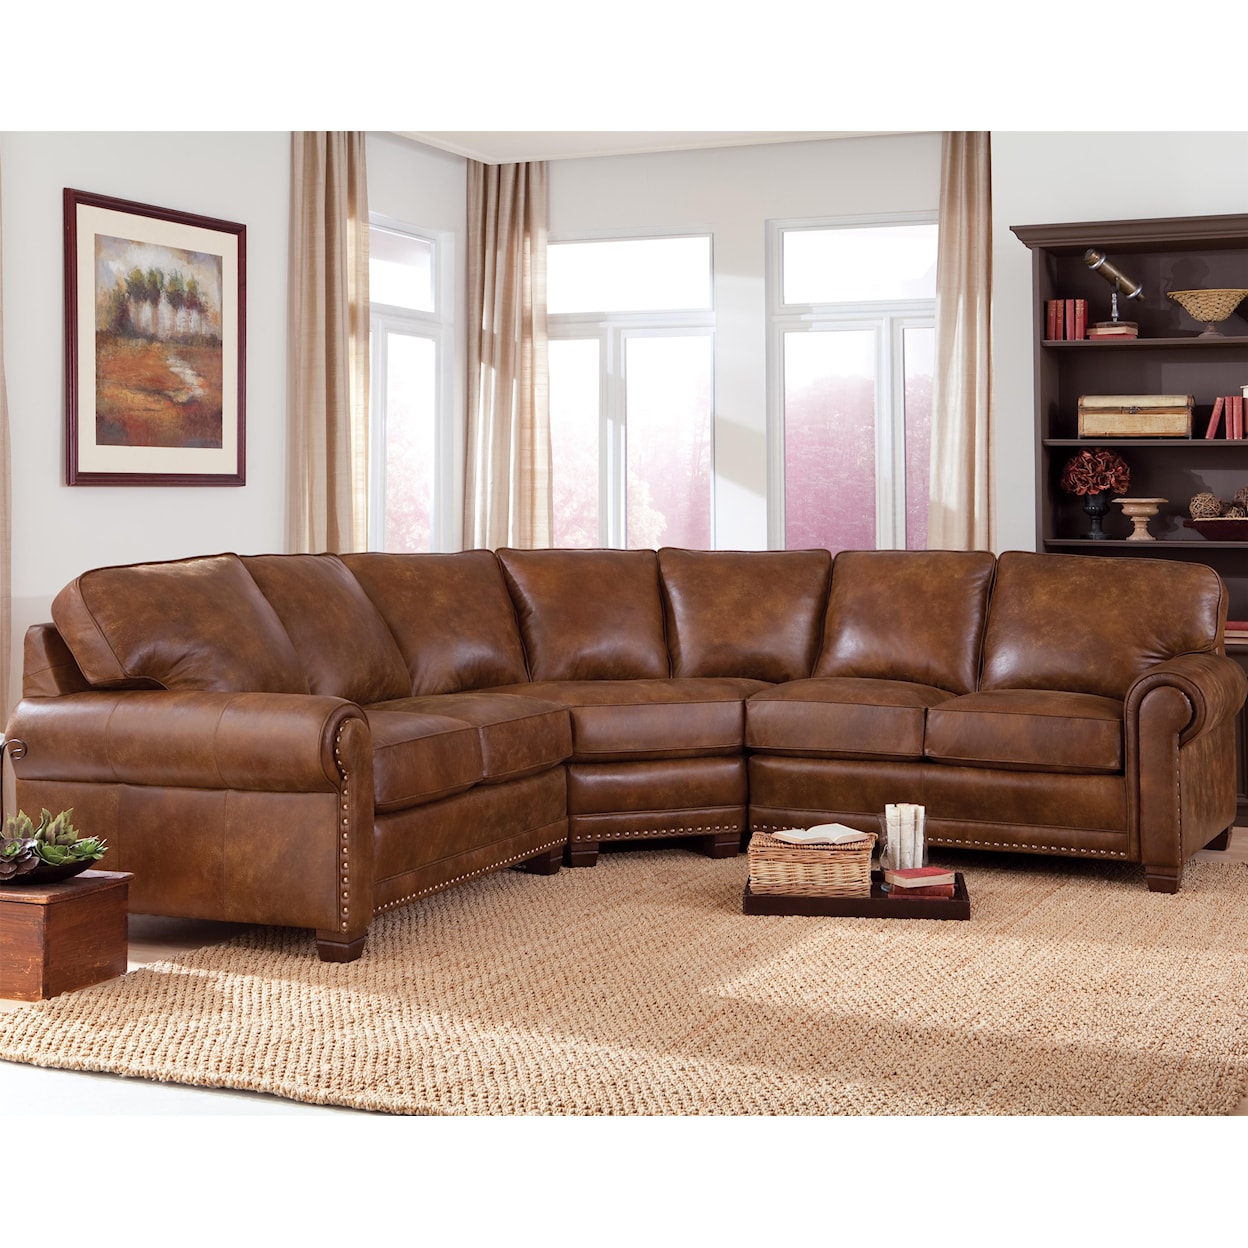 Smith Brothers 393 Sectional